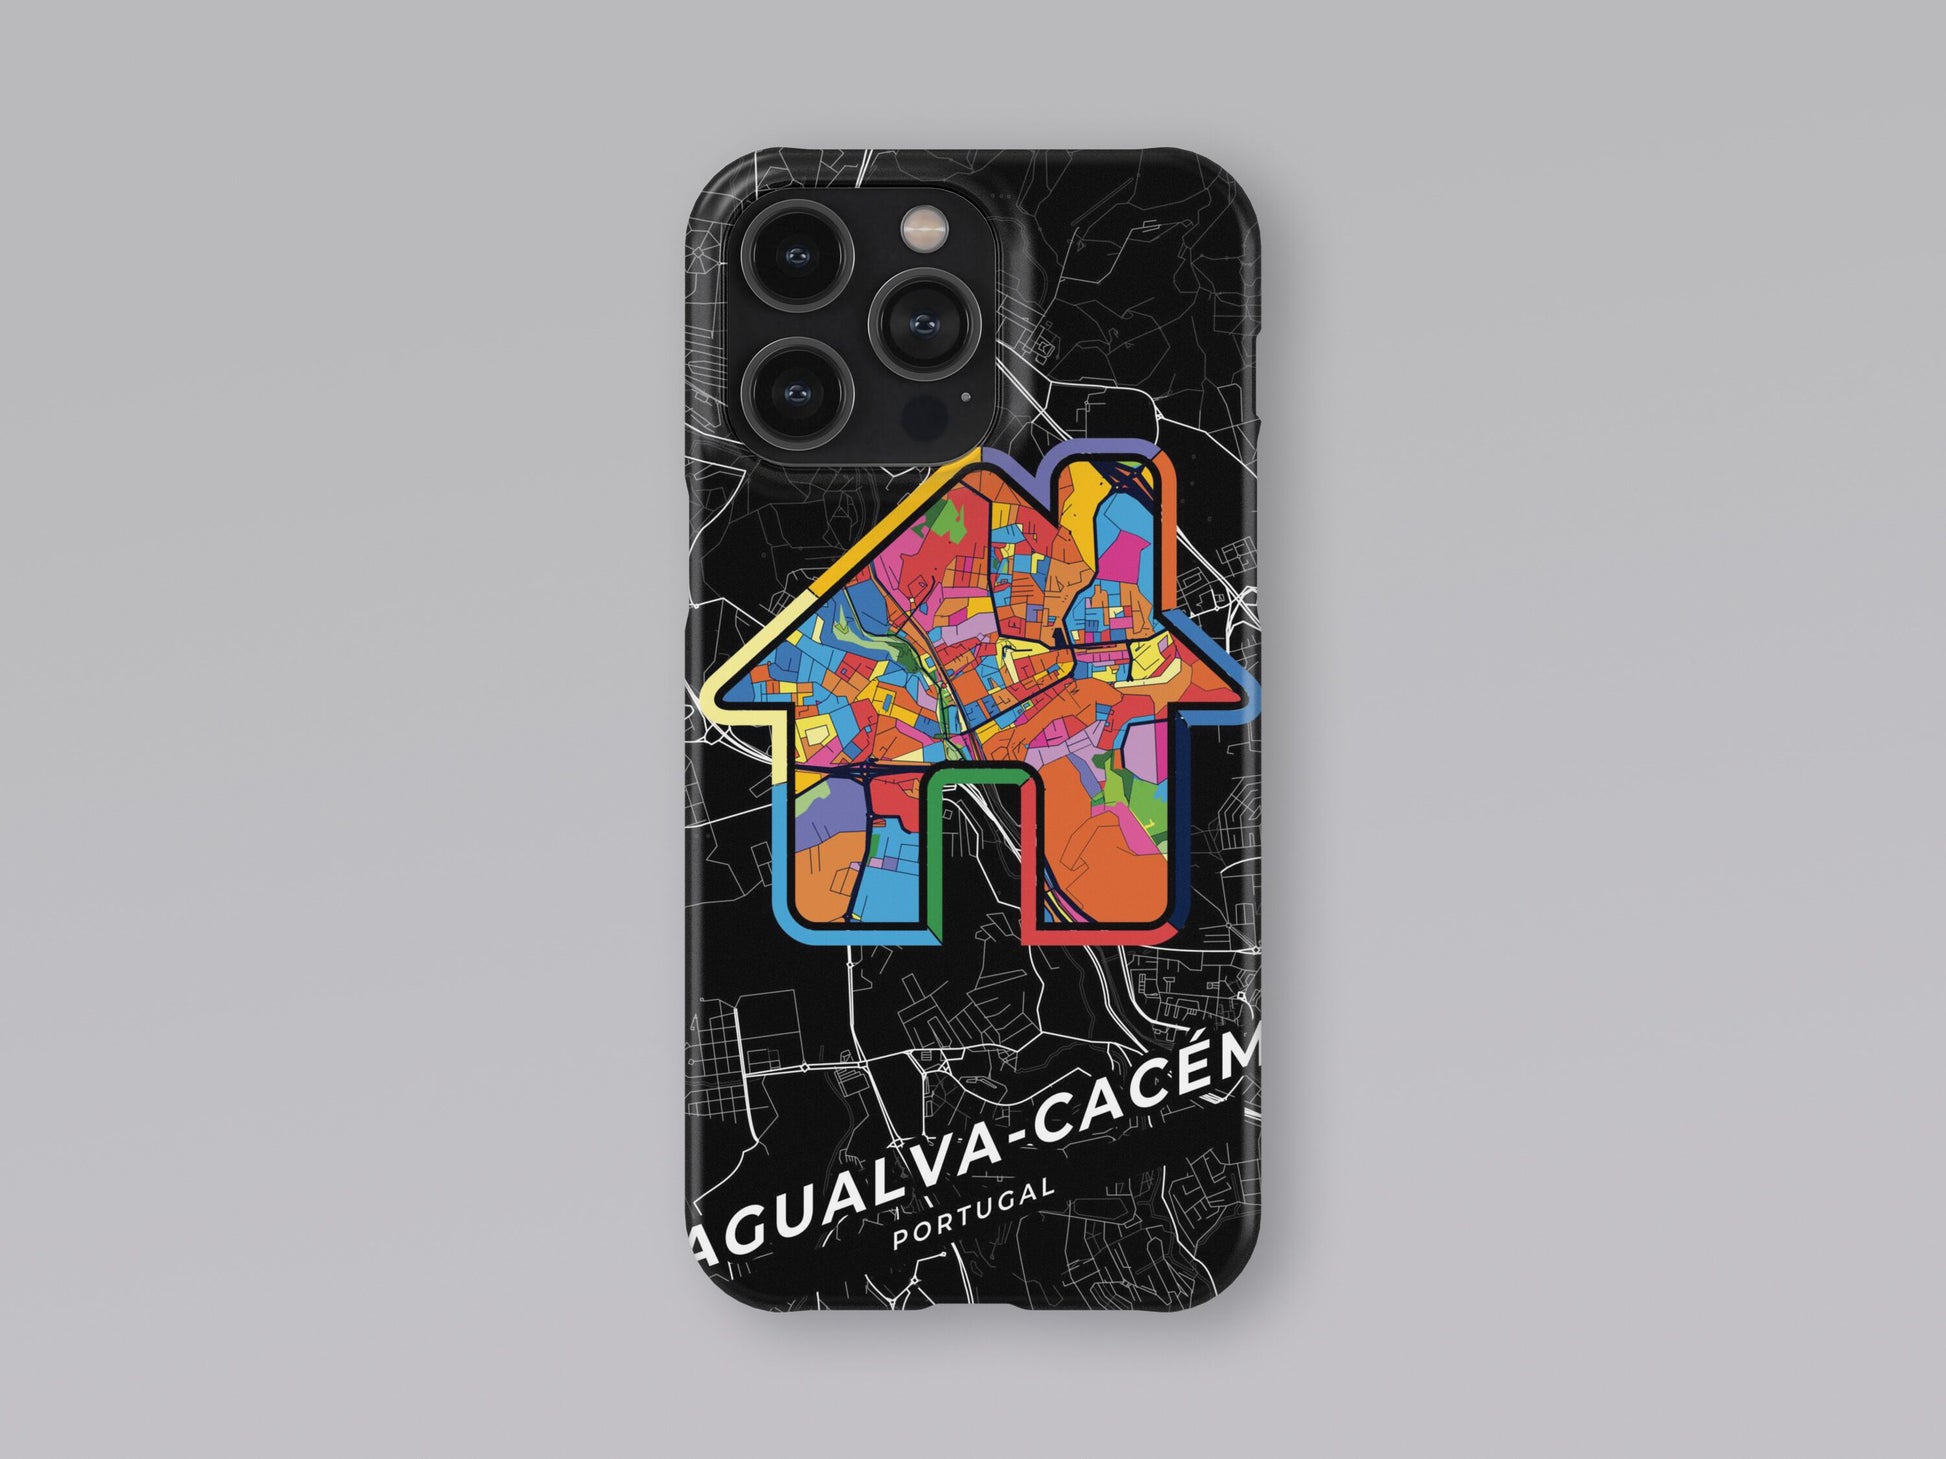 Agualva-Cacém Portugal slim phone case with colorful icon. Birthday, wedding or housewarming gift. Couple match cases. 3